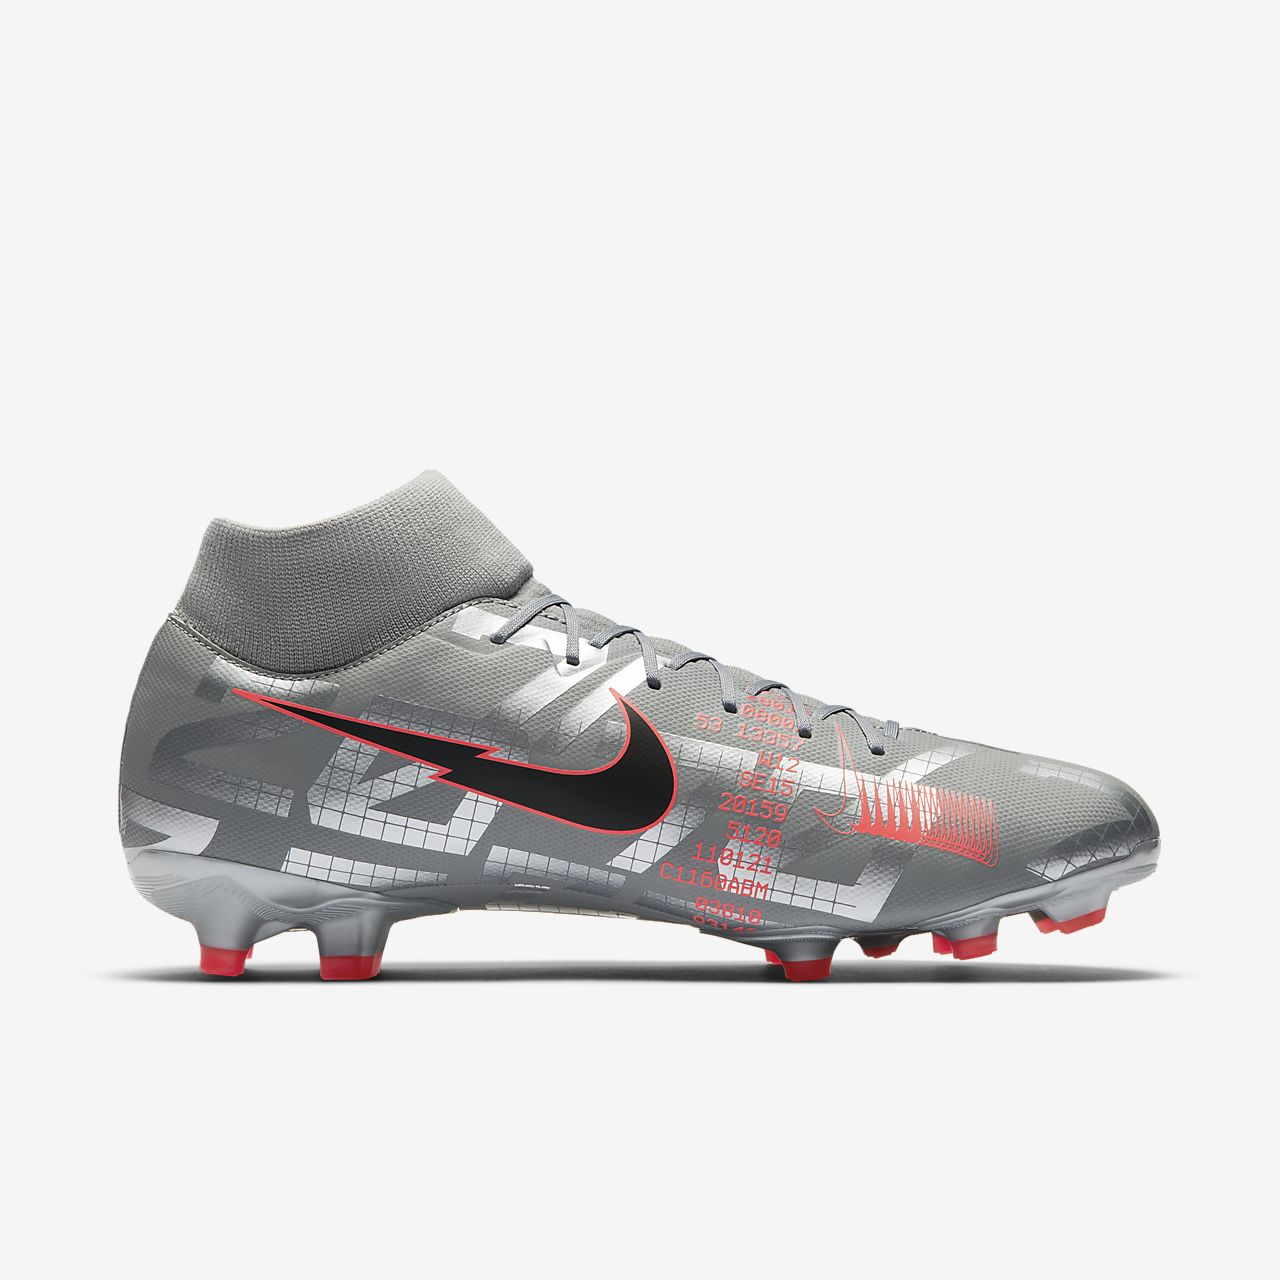 Nike JR Superfly 6 Academy GS TF Shoes Gray price 59.99.